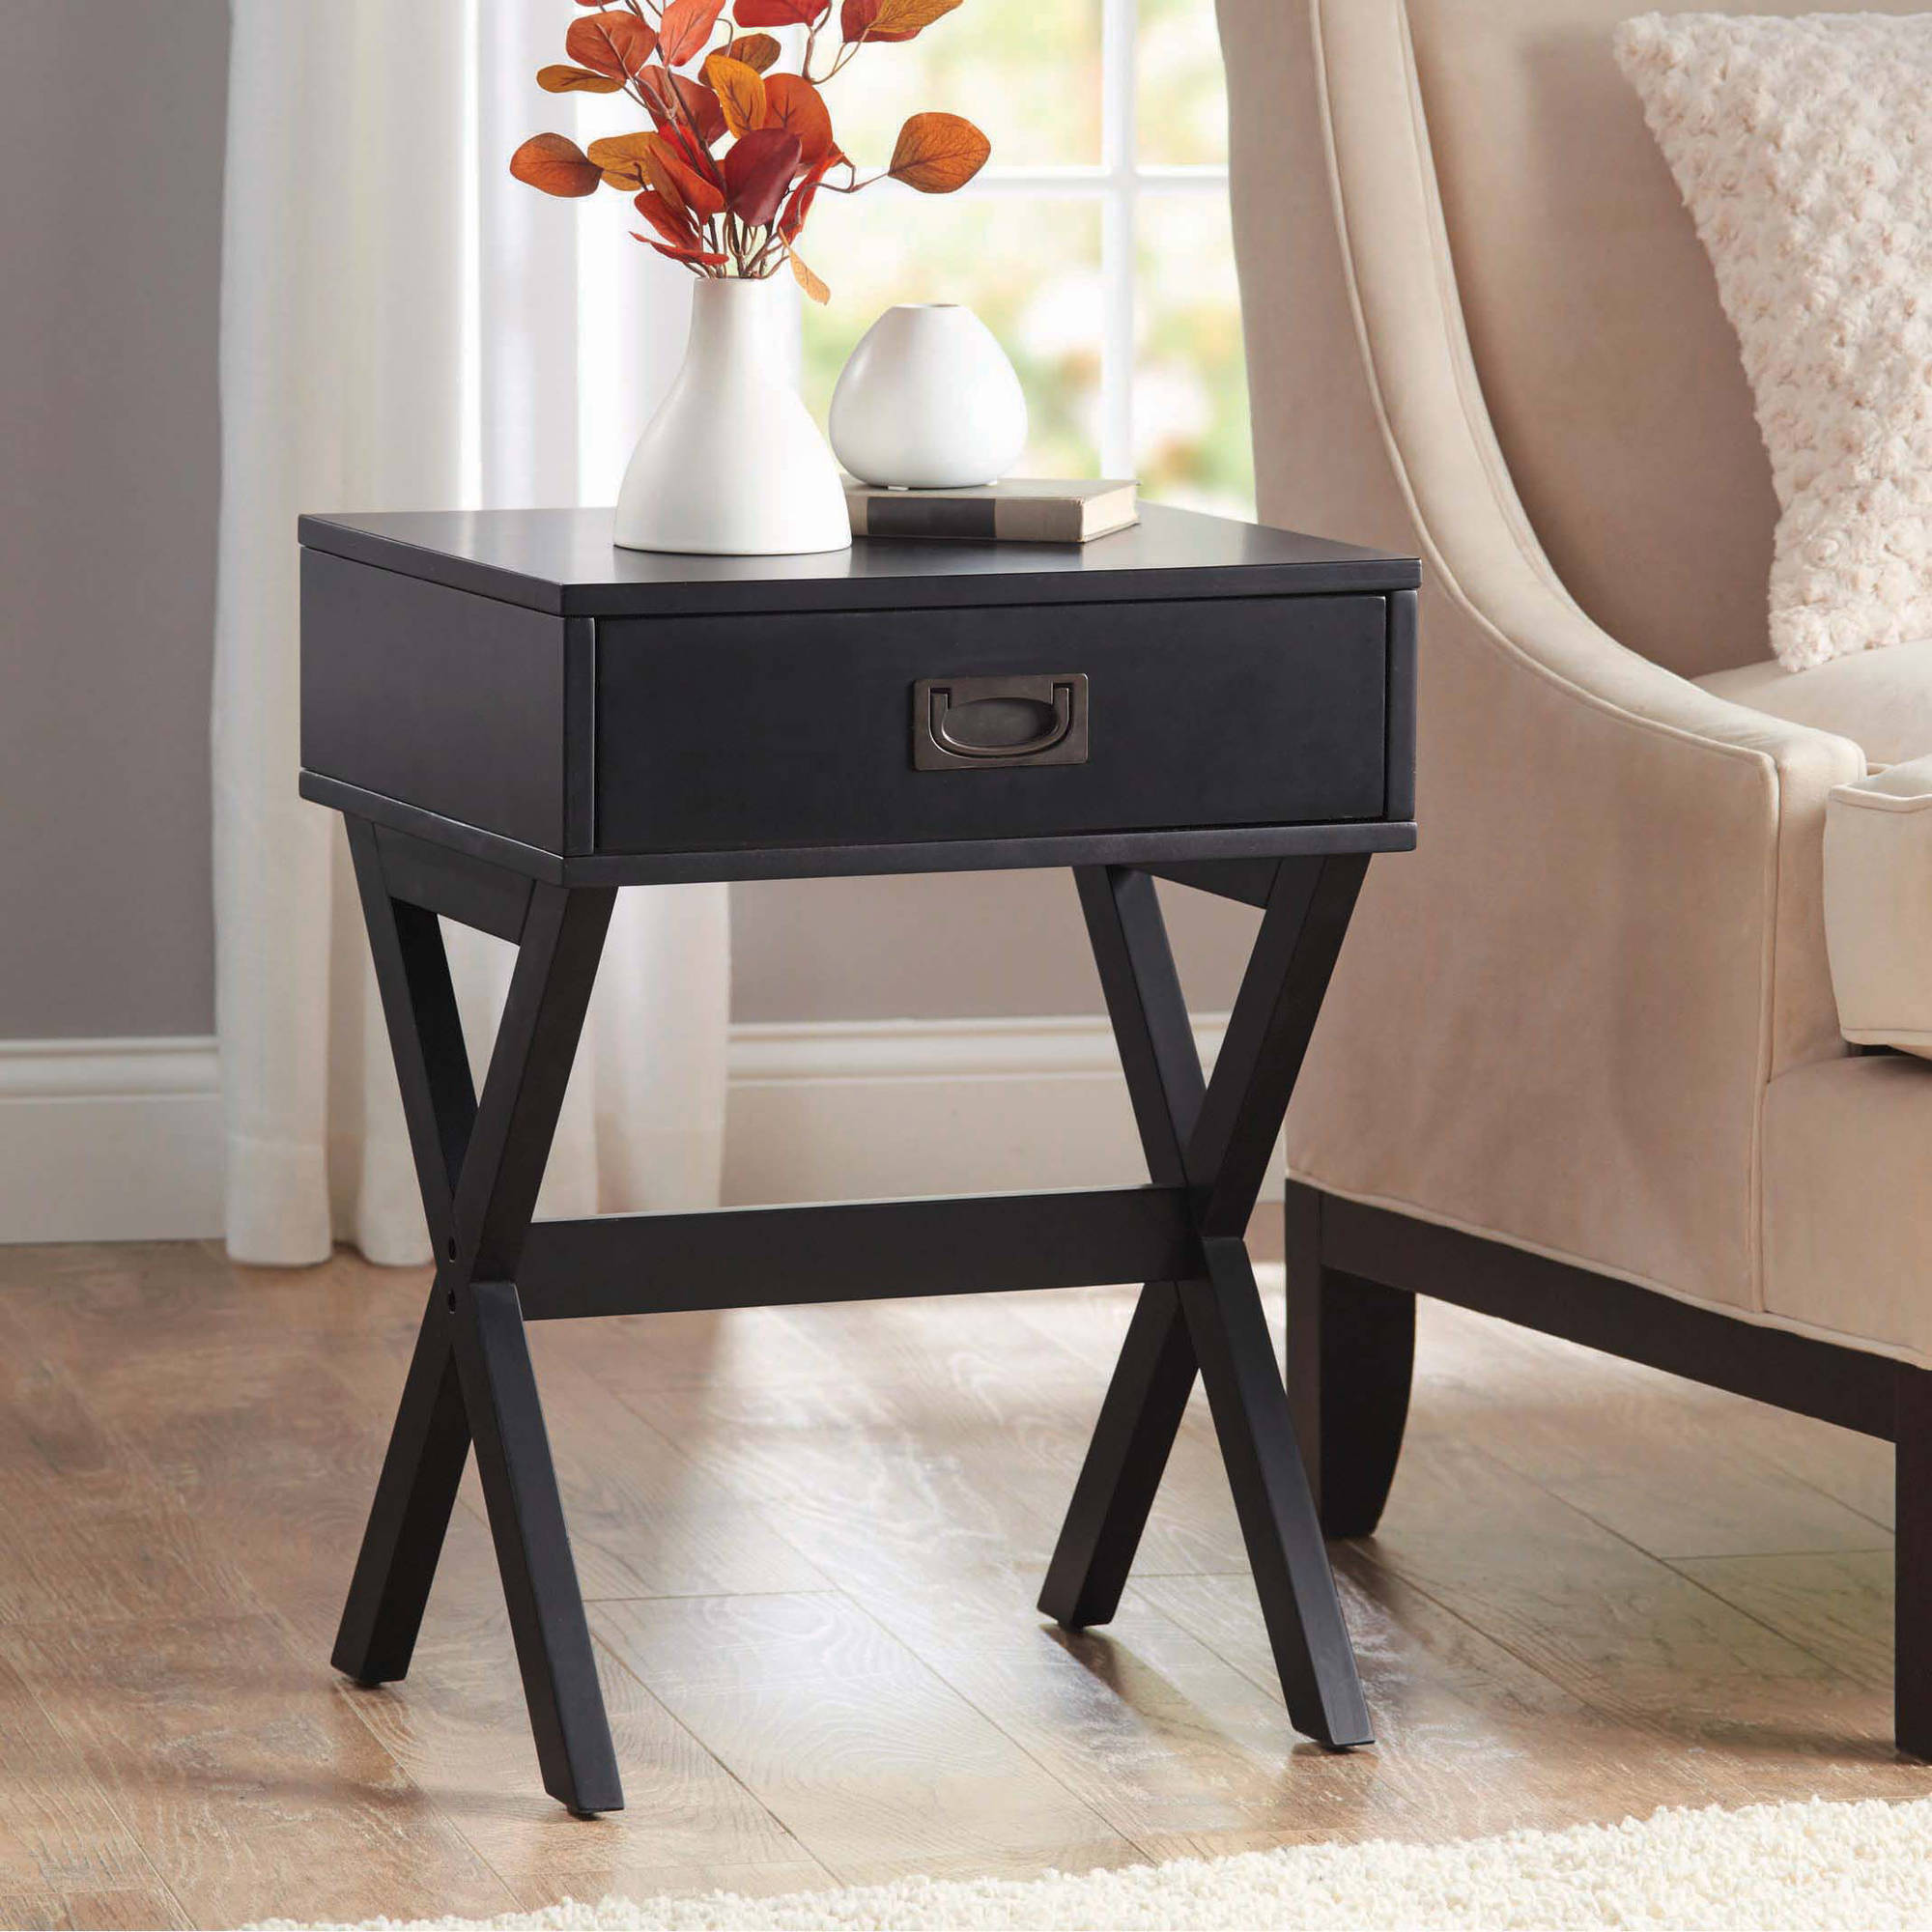 better homes gardens leg accent table with drawer multiple under colors lucite console west indies furniture retro bedroom tiny lamp circle coffee back couch small occasional